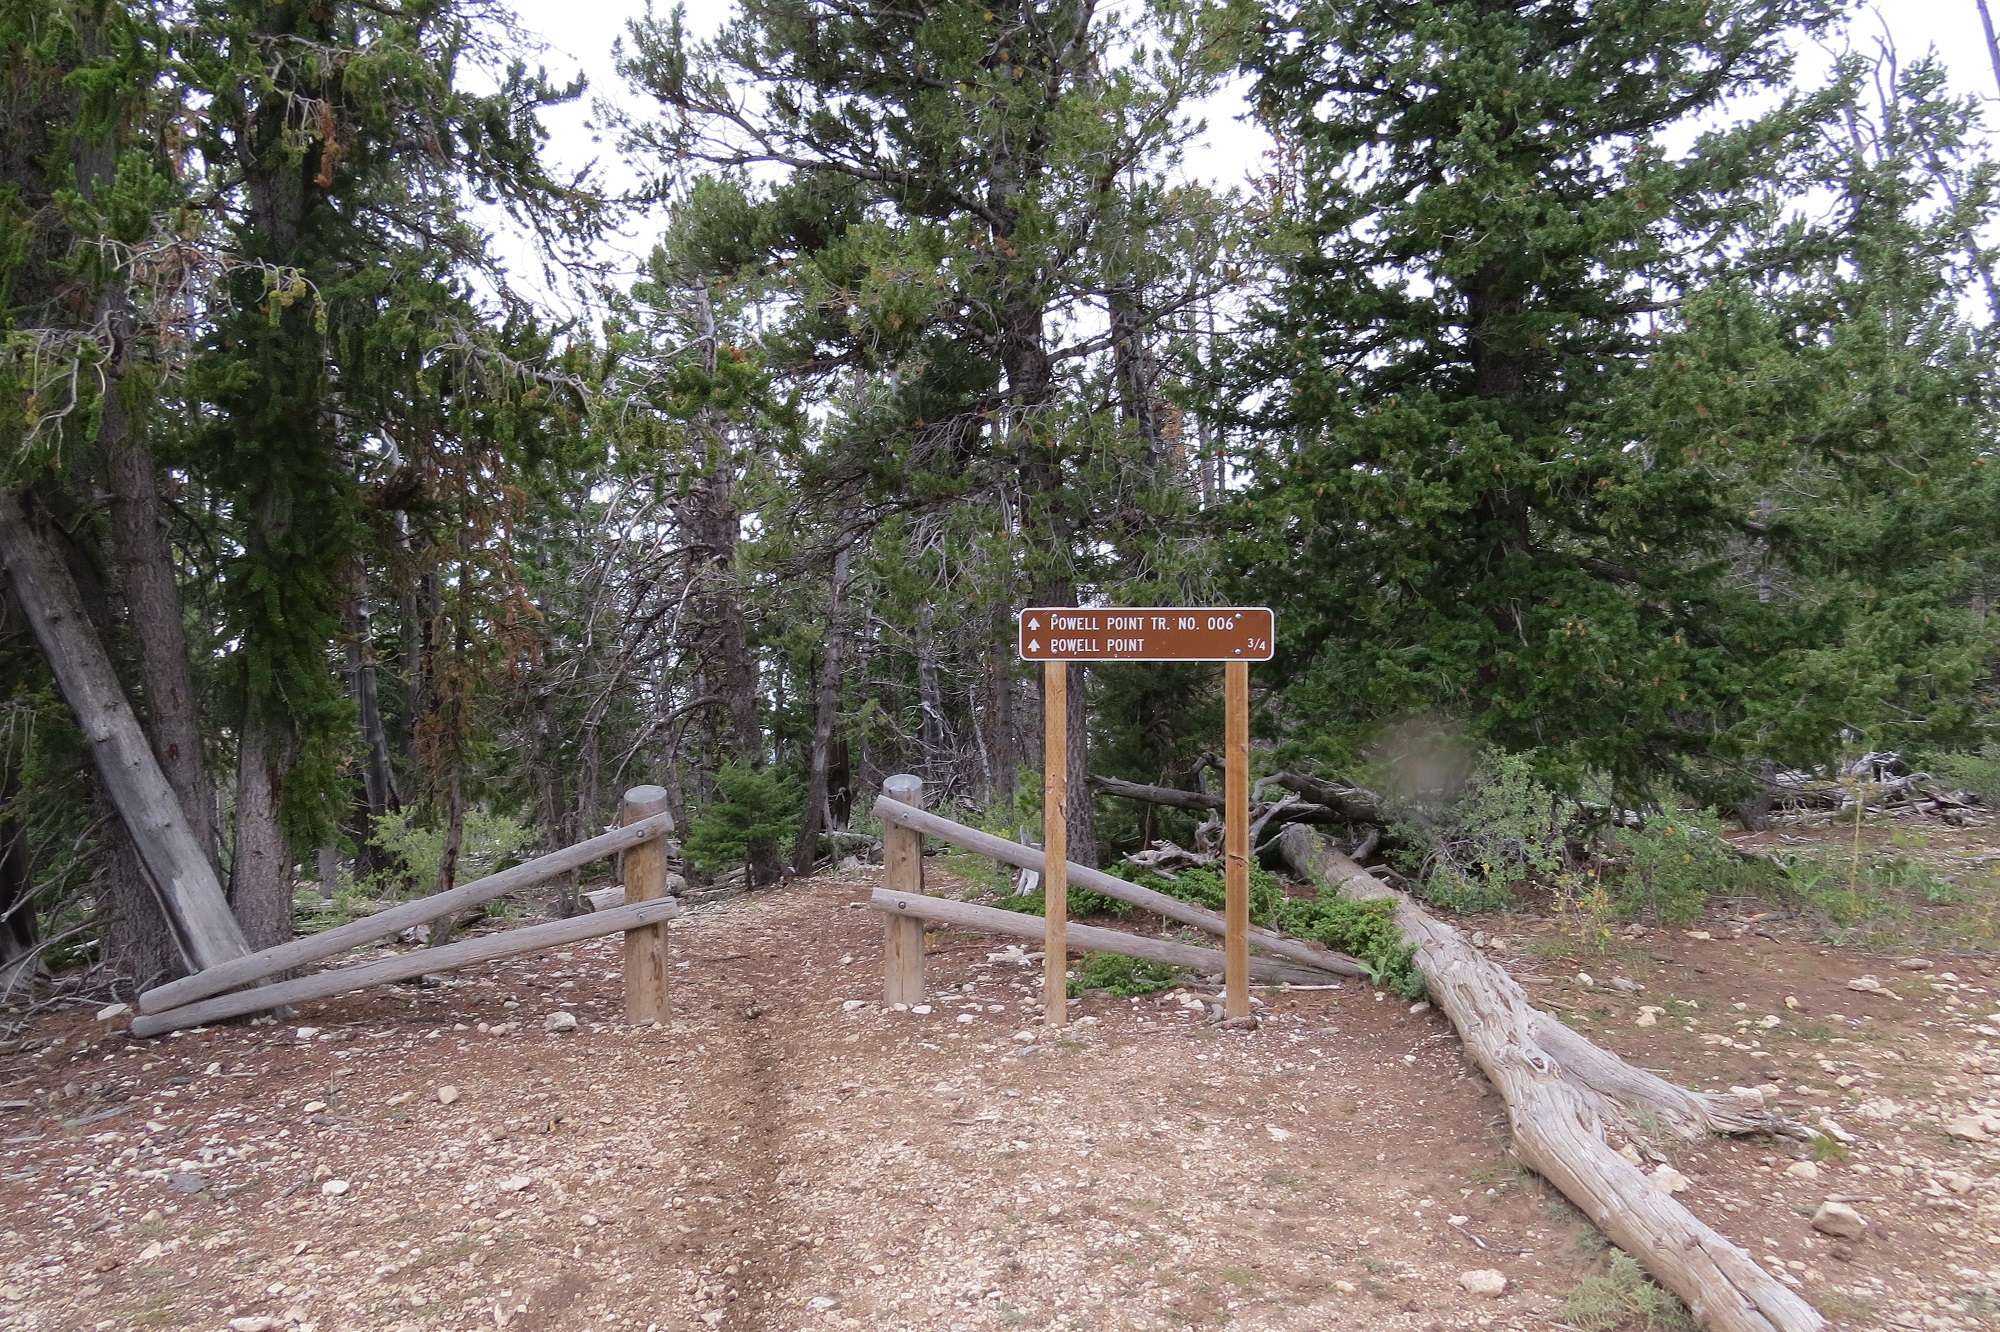 Entrance to the Powell Point trail